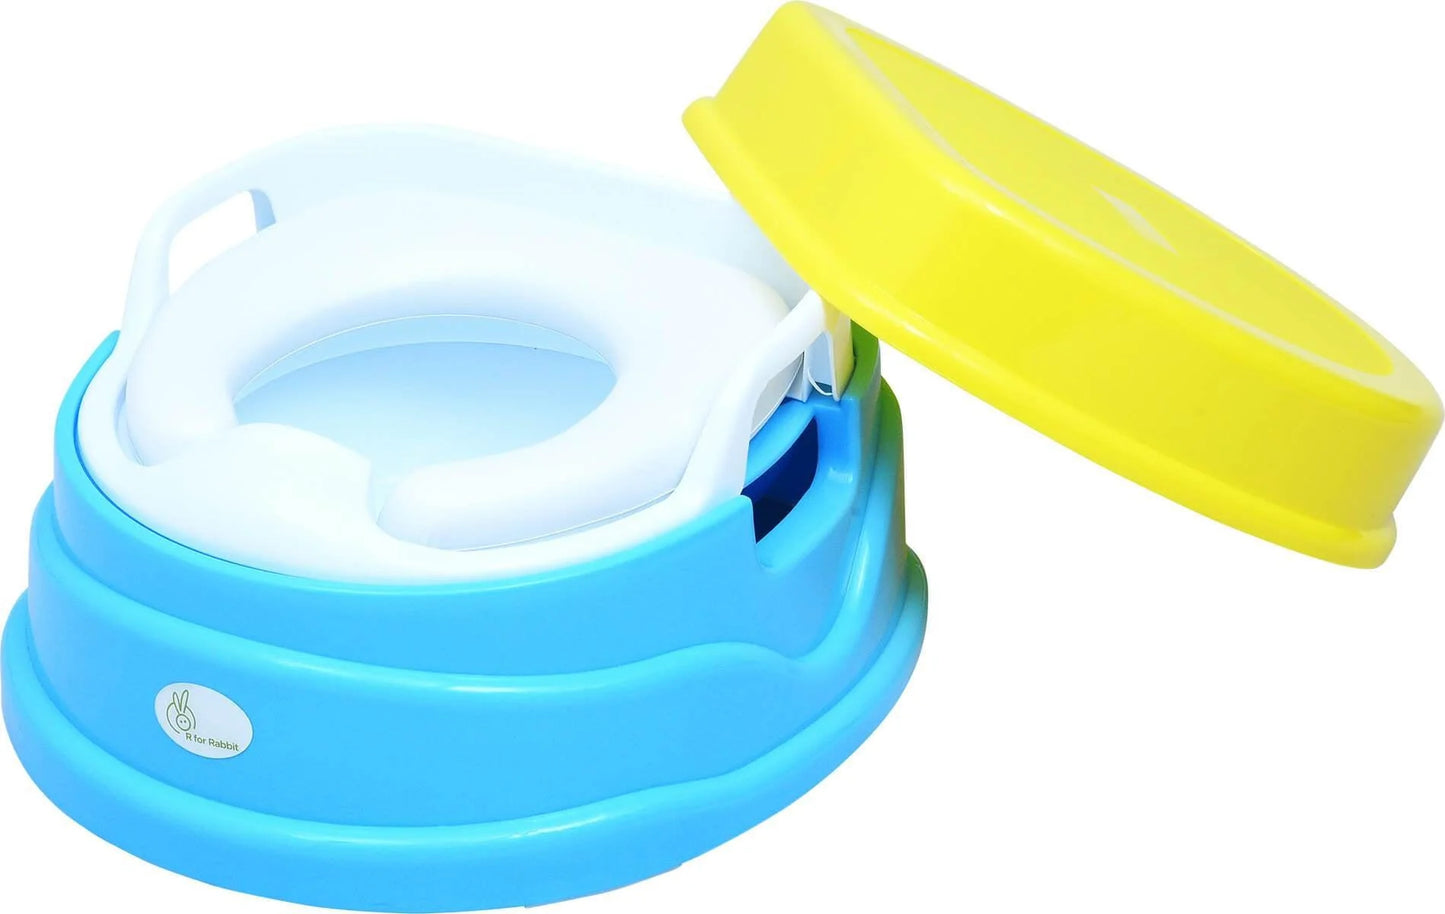 Ding Dong Potty Seat Yellow Blue